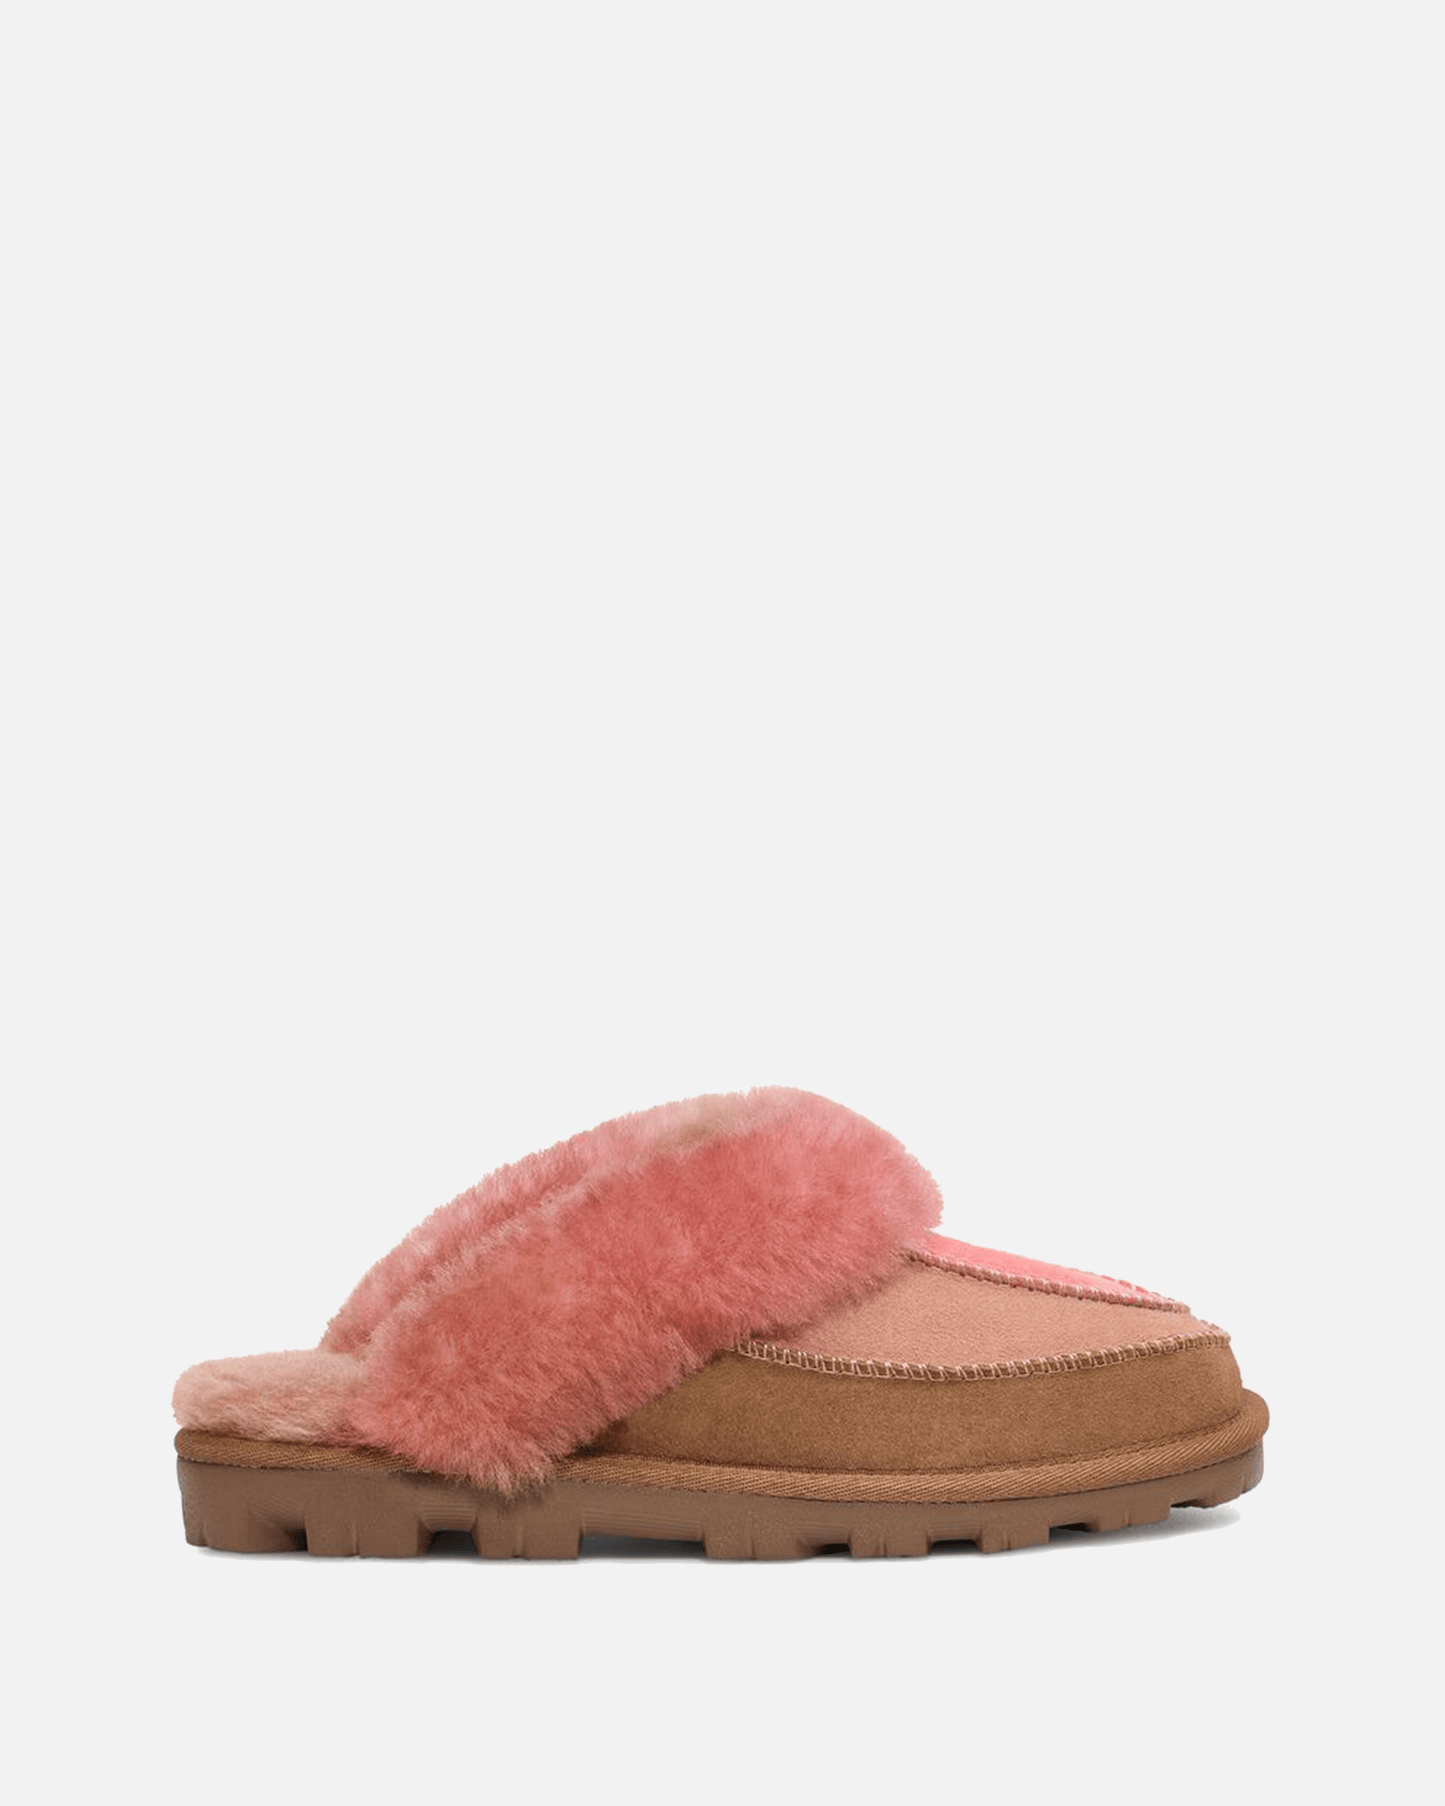 UGG Women's Shoes Tschabalala Self Coquette in Ombré Pink